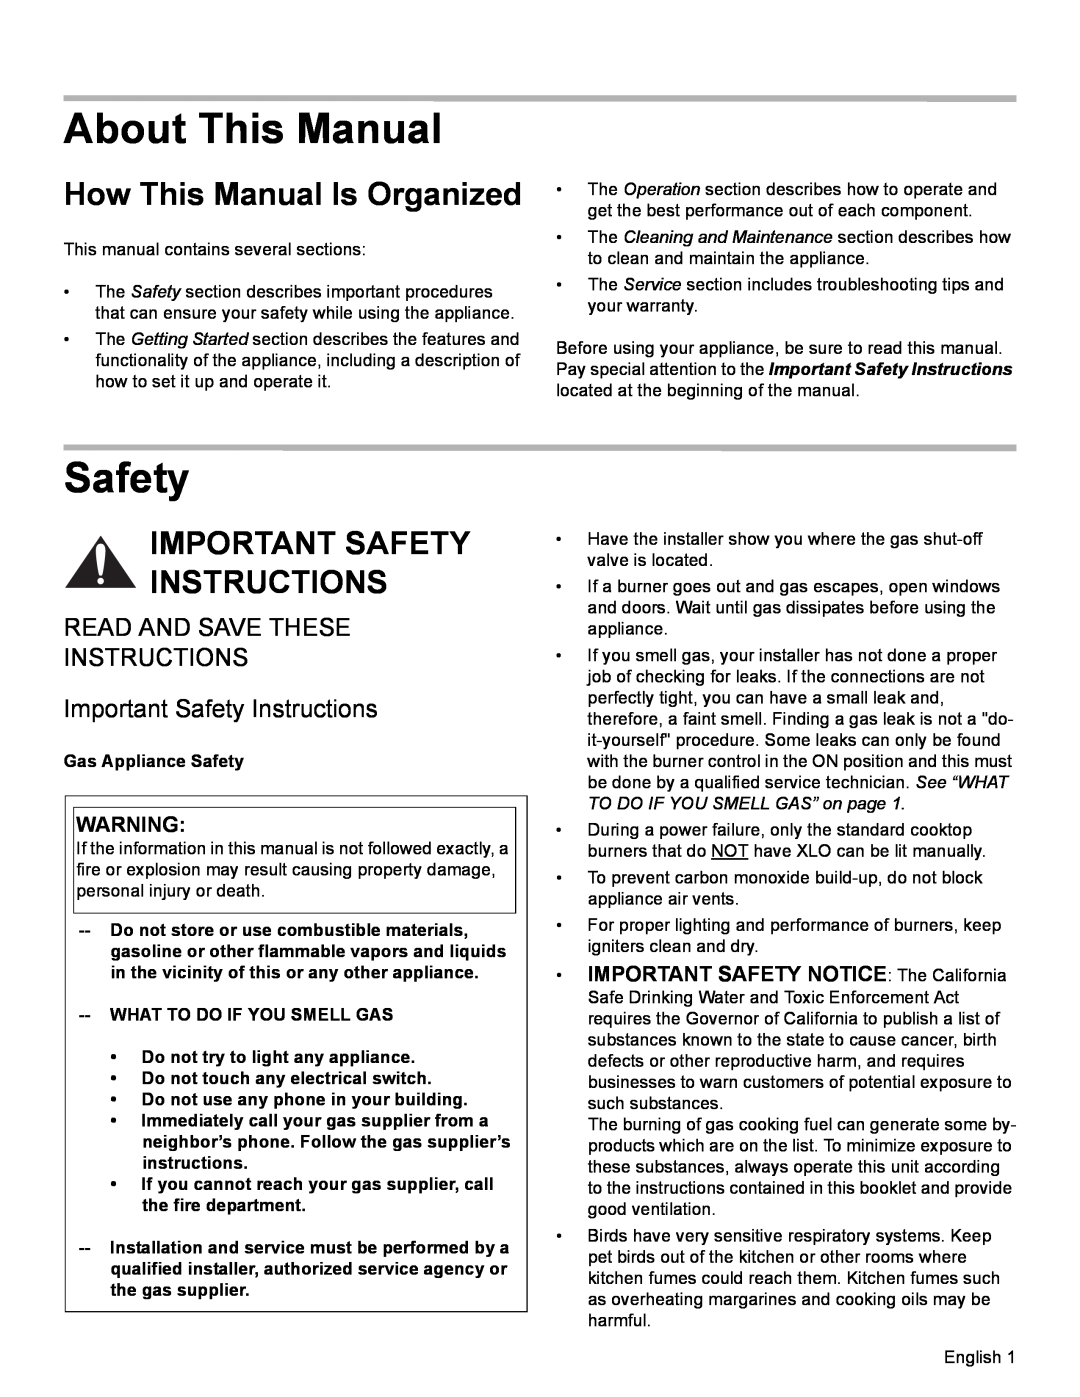 Bosch Appliances SGSX manual About This Manual, How This Manual Is Organized, Important Safety Instructions 